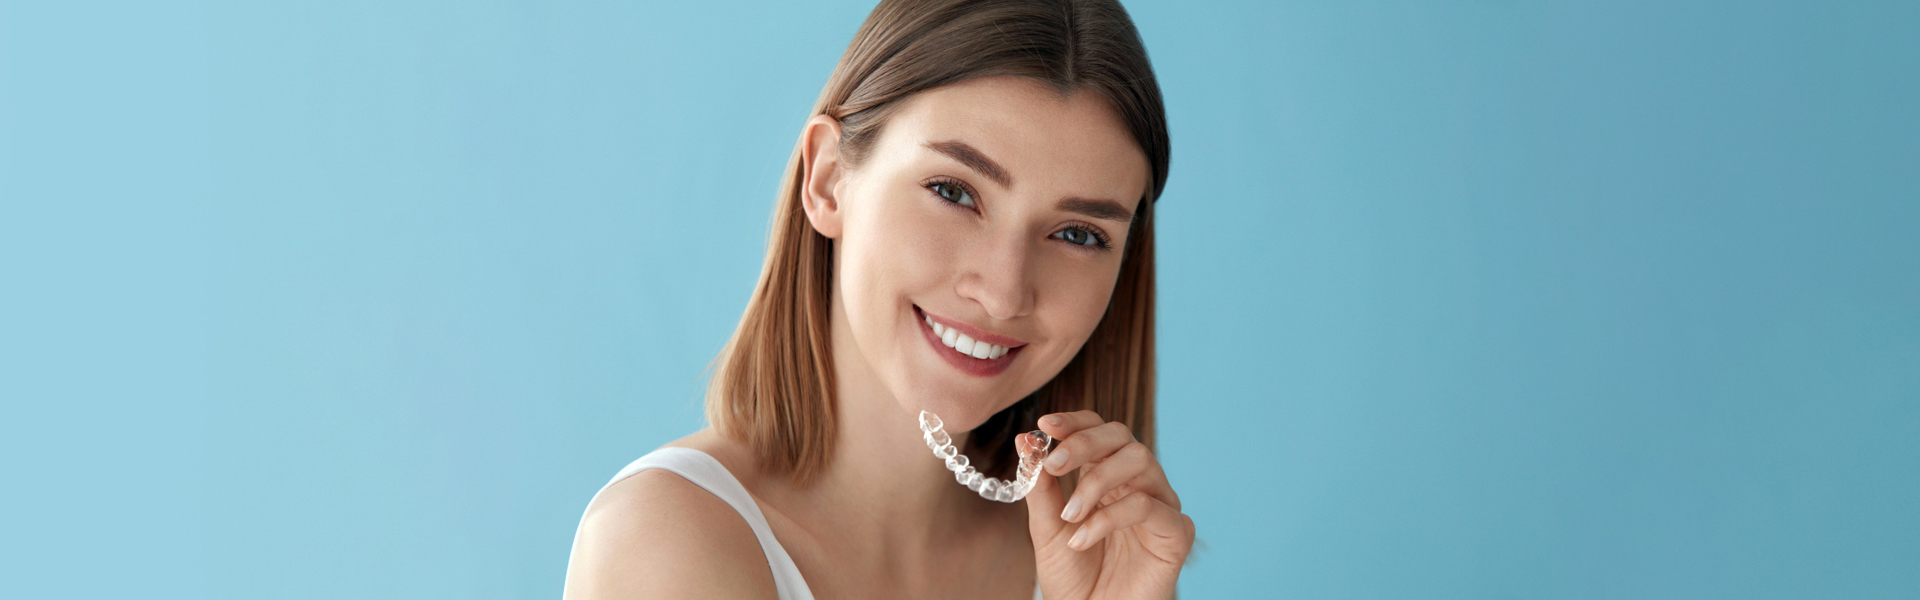 Invisalign Myths and Facts to Know About